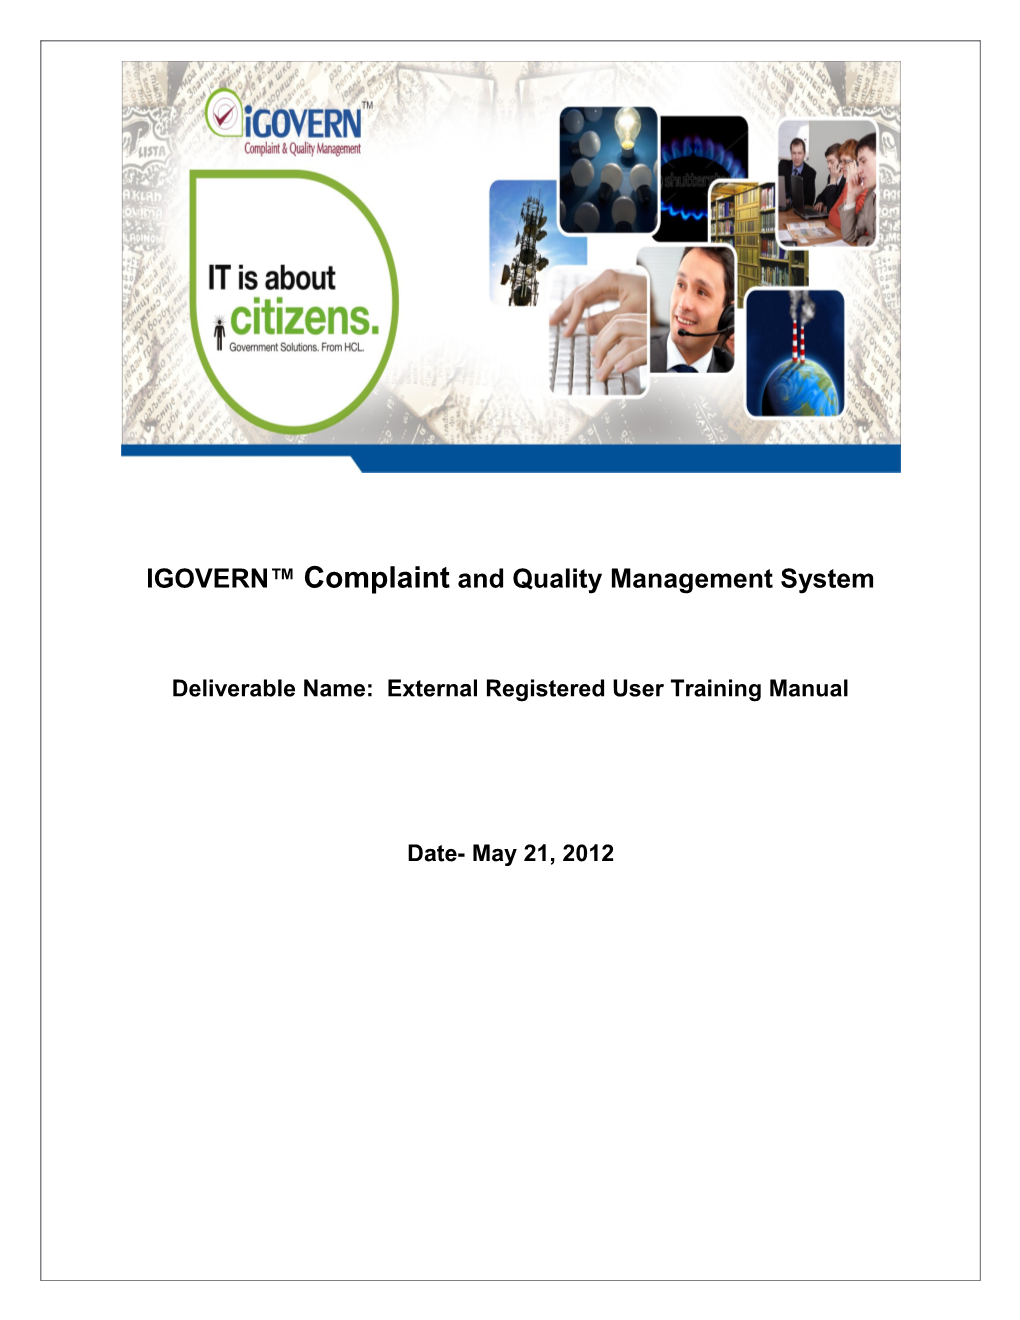 IGOVERN Complaint and Quality Management System